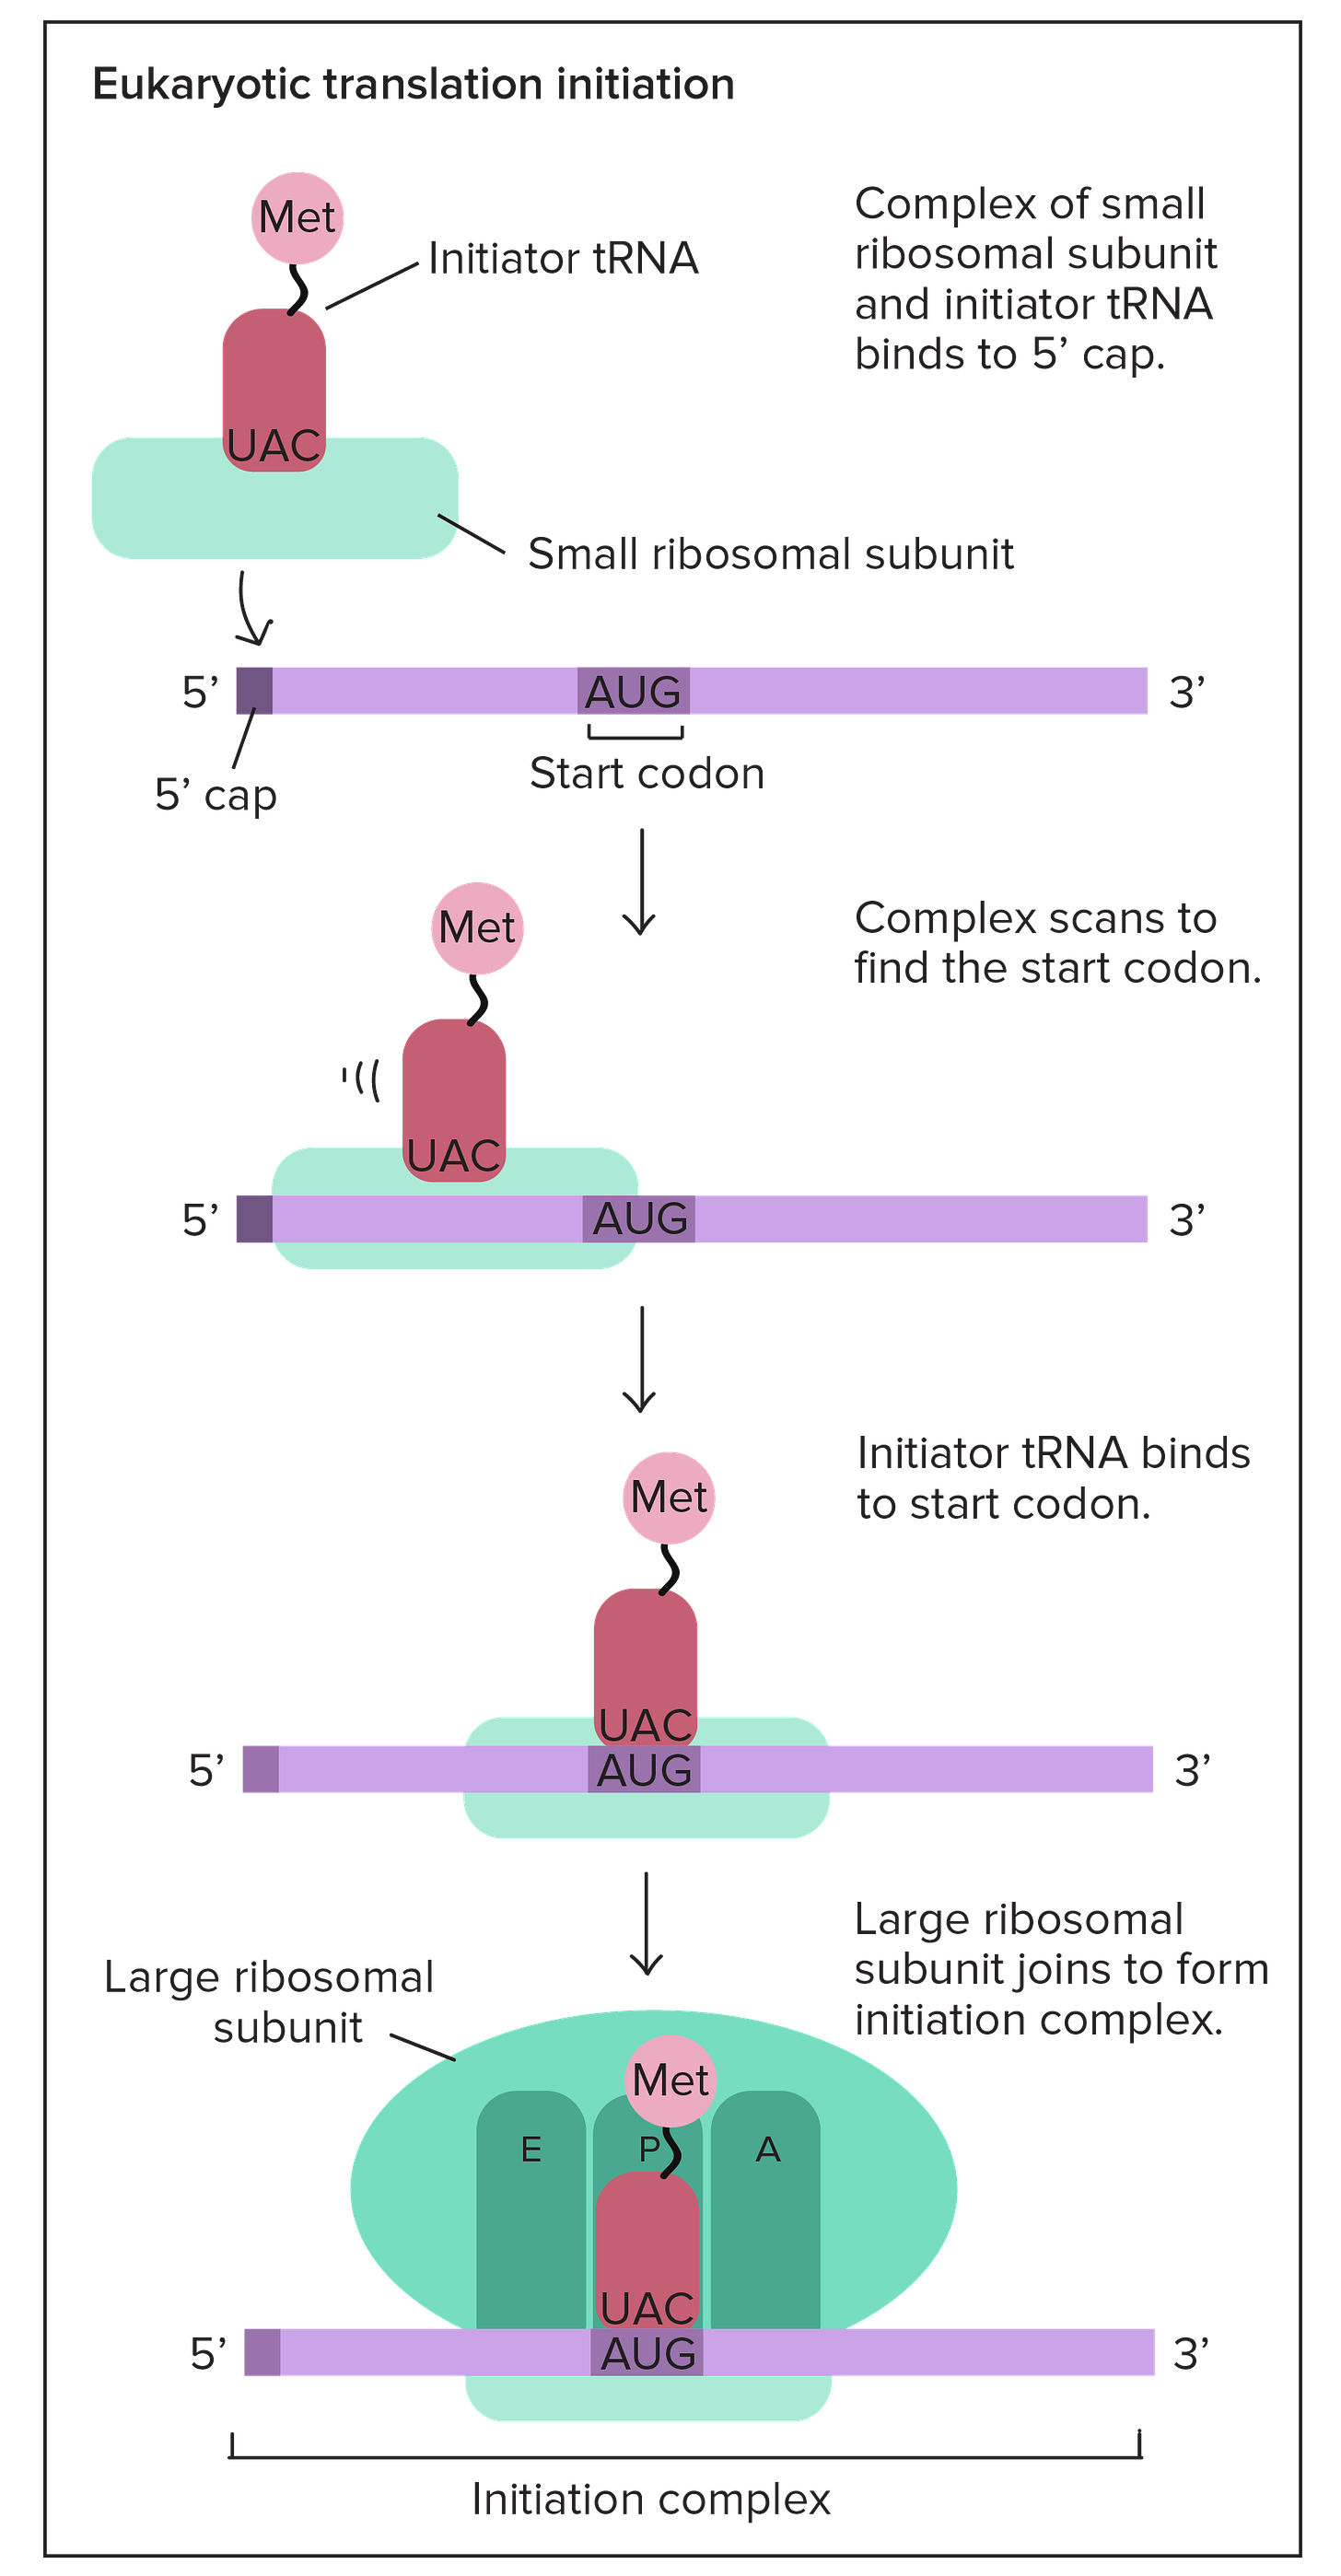 Eukaryotic translation initiation:

1. Complex of small ribosomal subnit and initiator tRNA (bearing methionine) binds to 5' cap of mRNA.
2. Complex scans from 5' to 3' to find the start codon (AUG).
3. Initiator tRNA binds to start codon.
4. Large ribosomal subunit comes together with the mRNA, initiator tRNA, and small ribosomal subunit to form the initiation complex. The initiator tRNA is positioned in the P site of the assembled ribosome.

These steps are assisted by initiation factors (not shown in diagram).